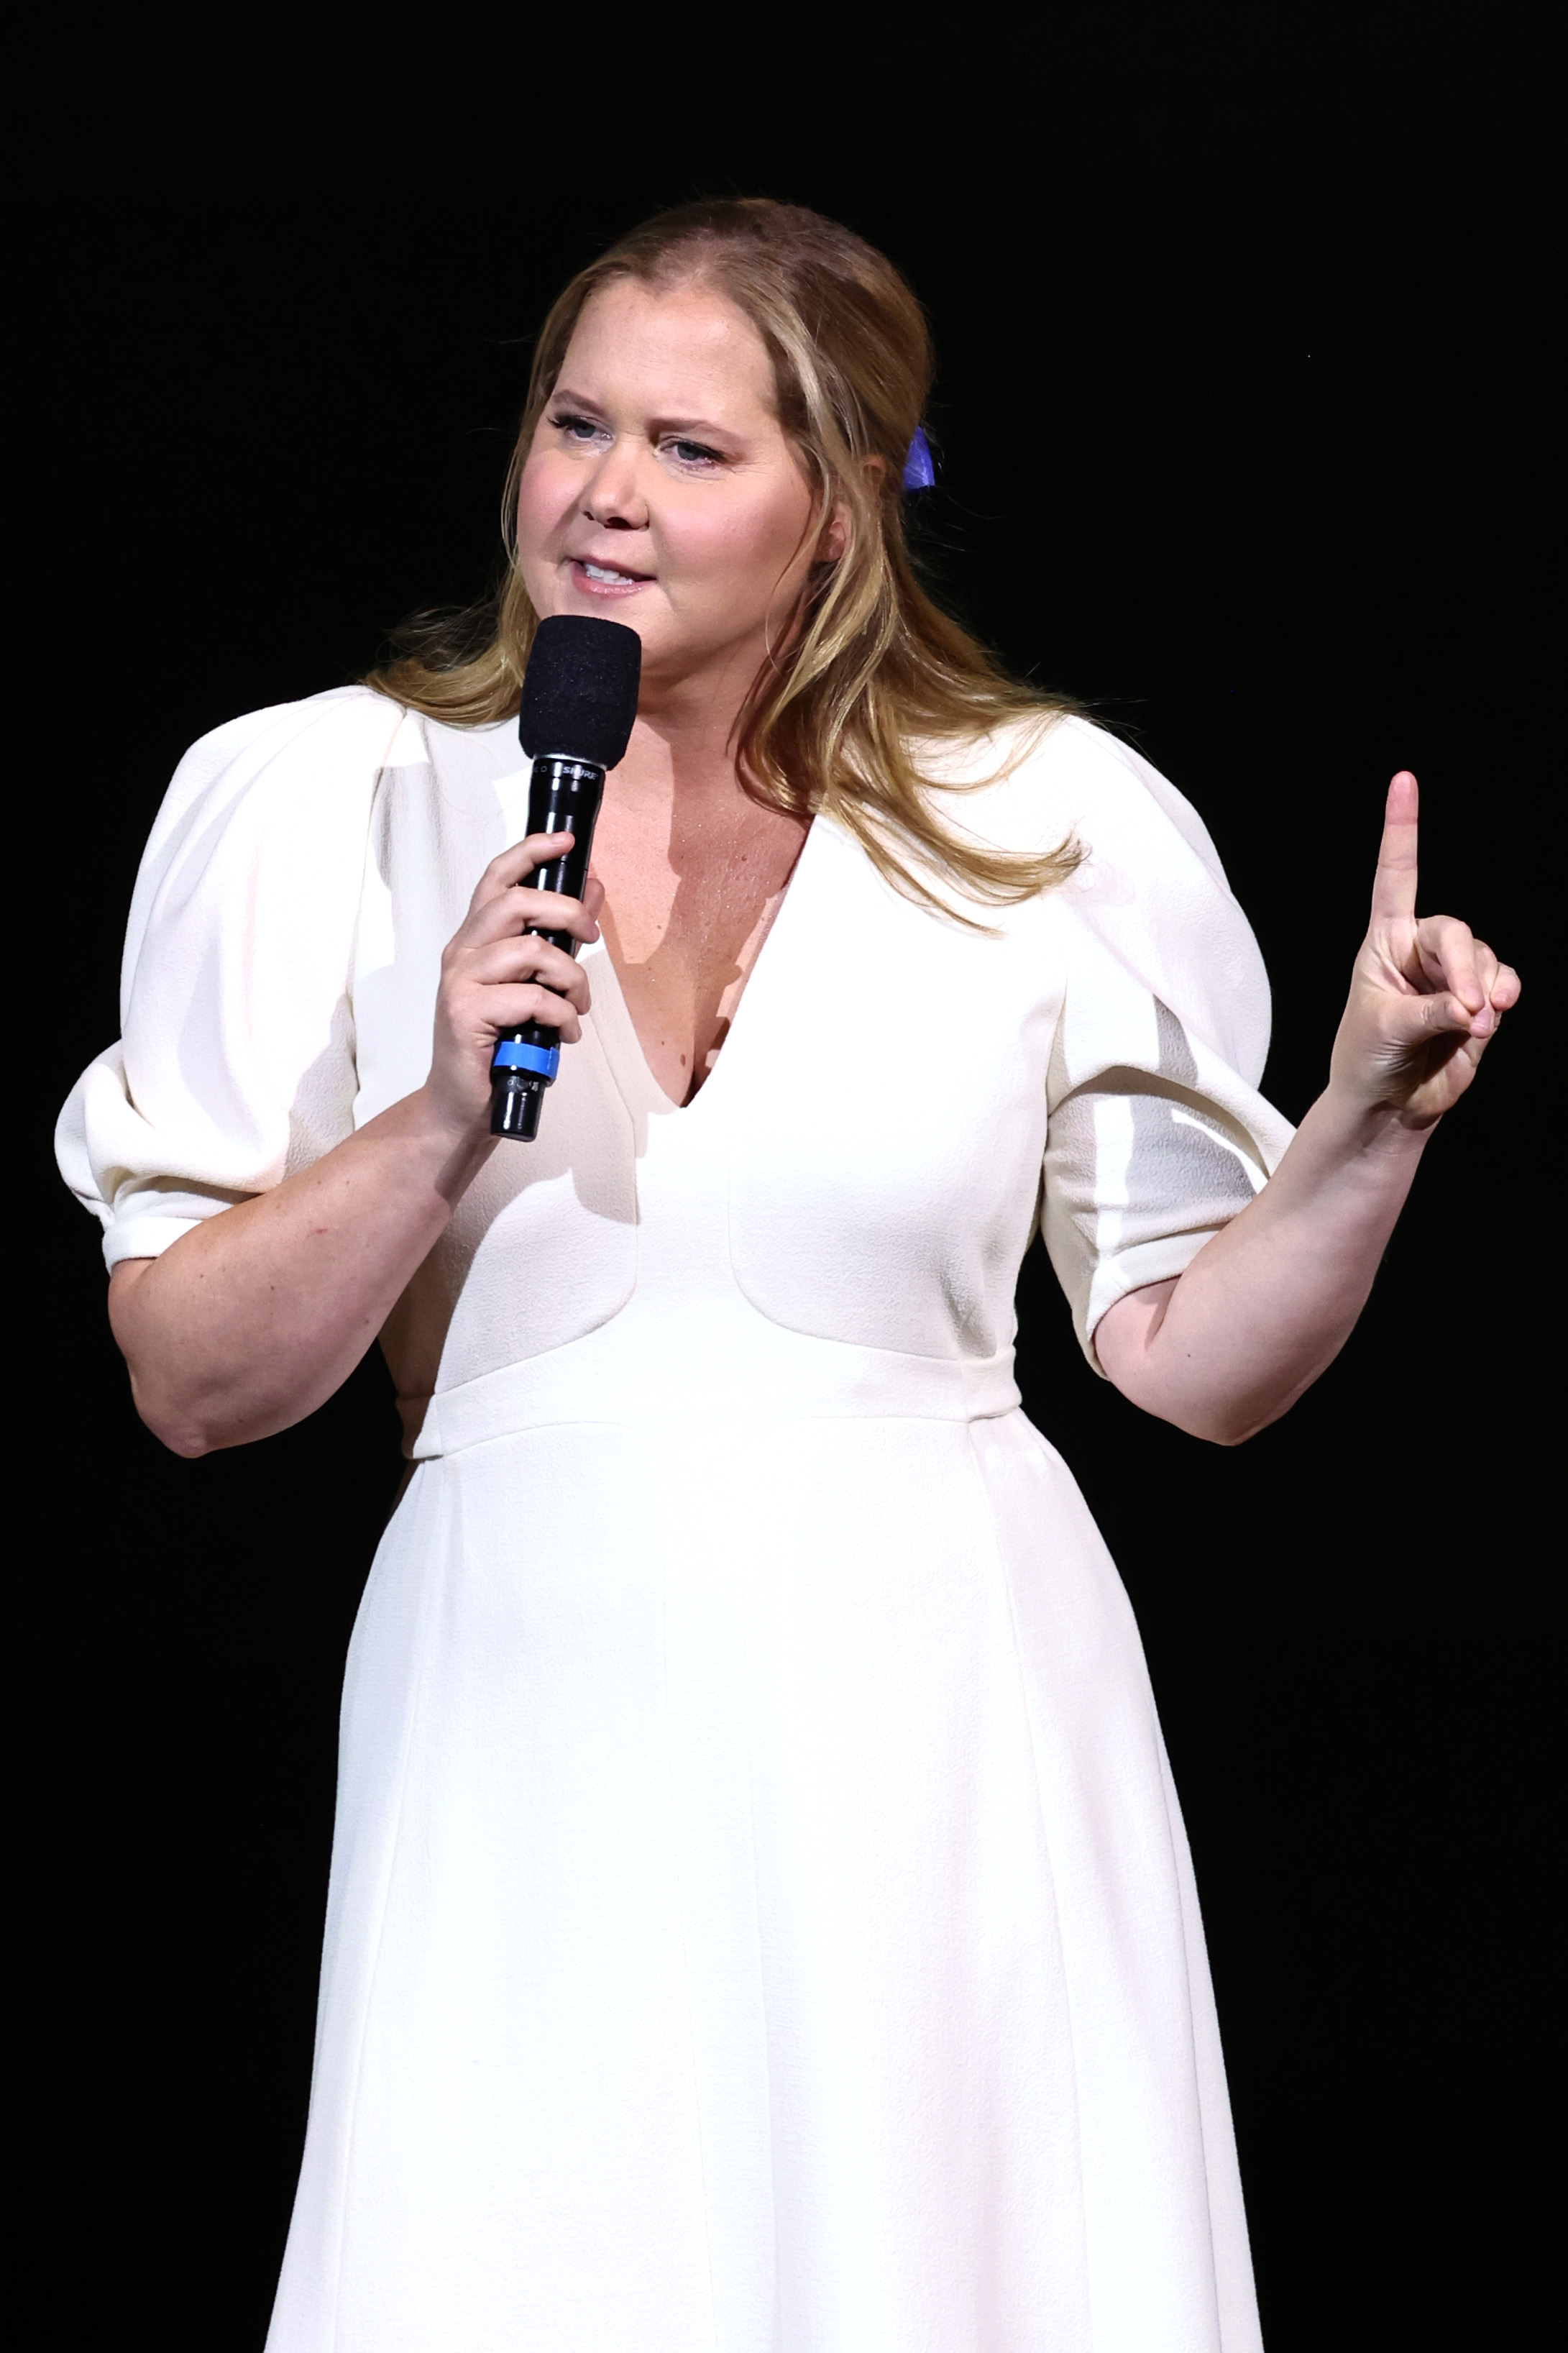 Amy, in a white dress with puffed sleeves, speaking into a microphone onstage